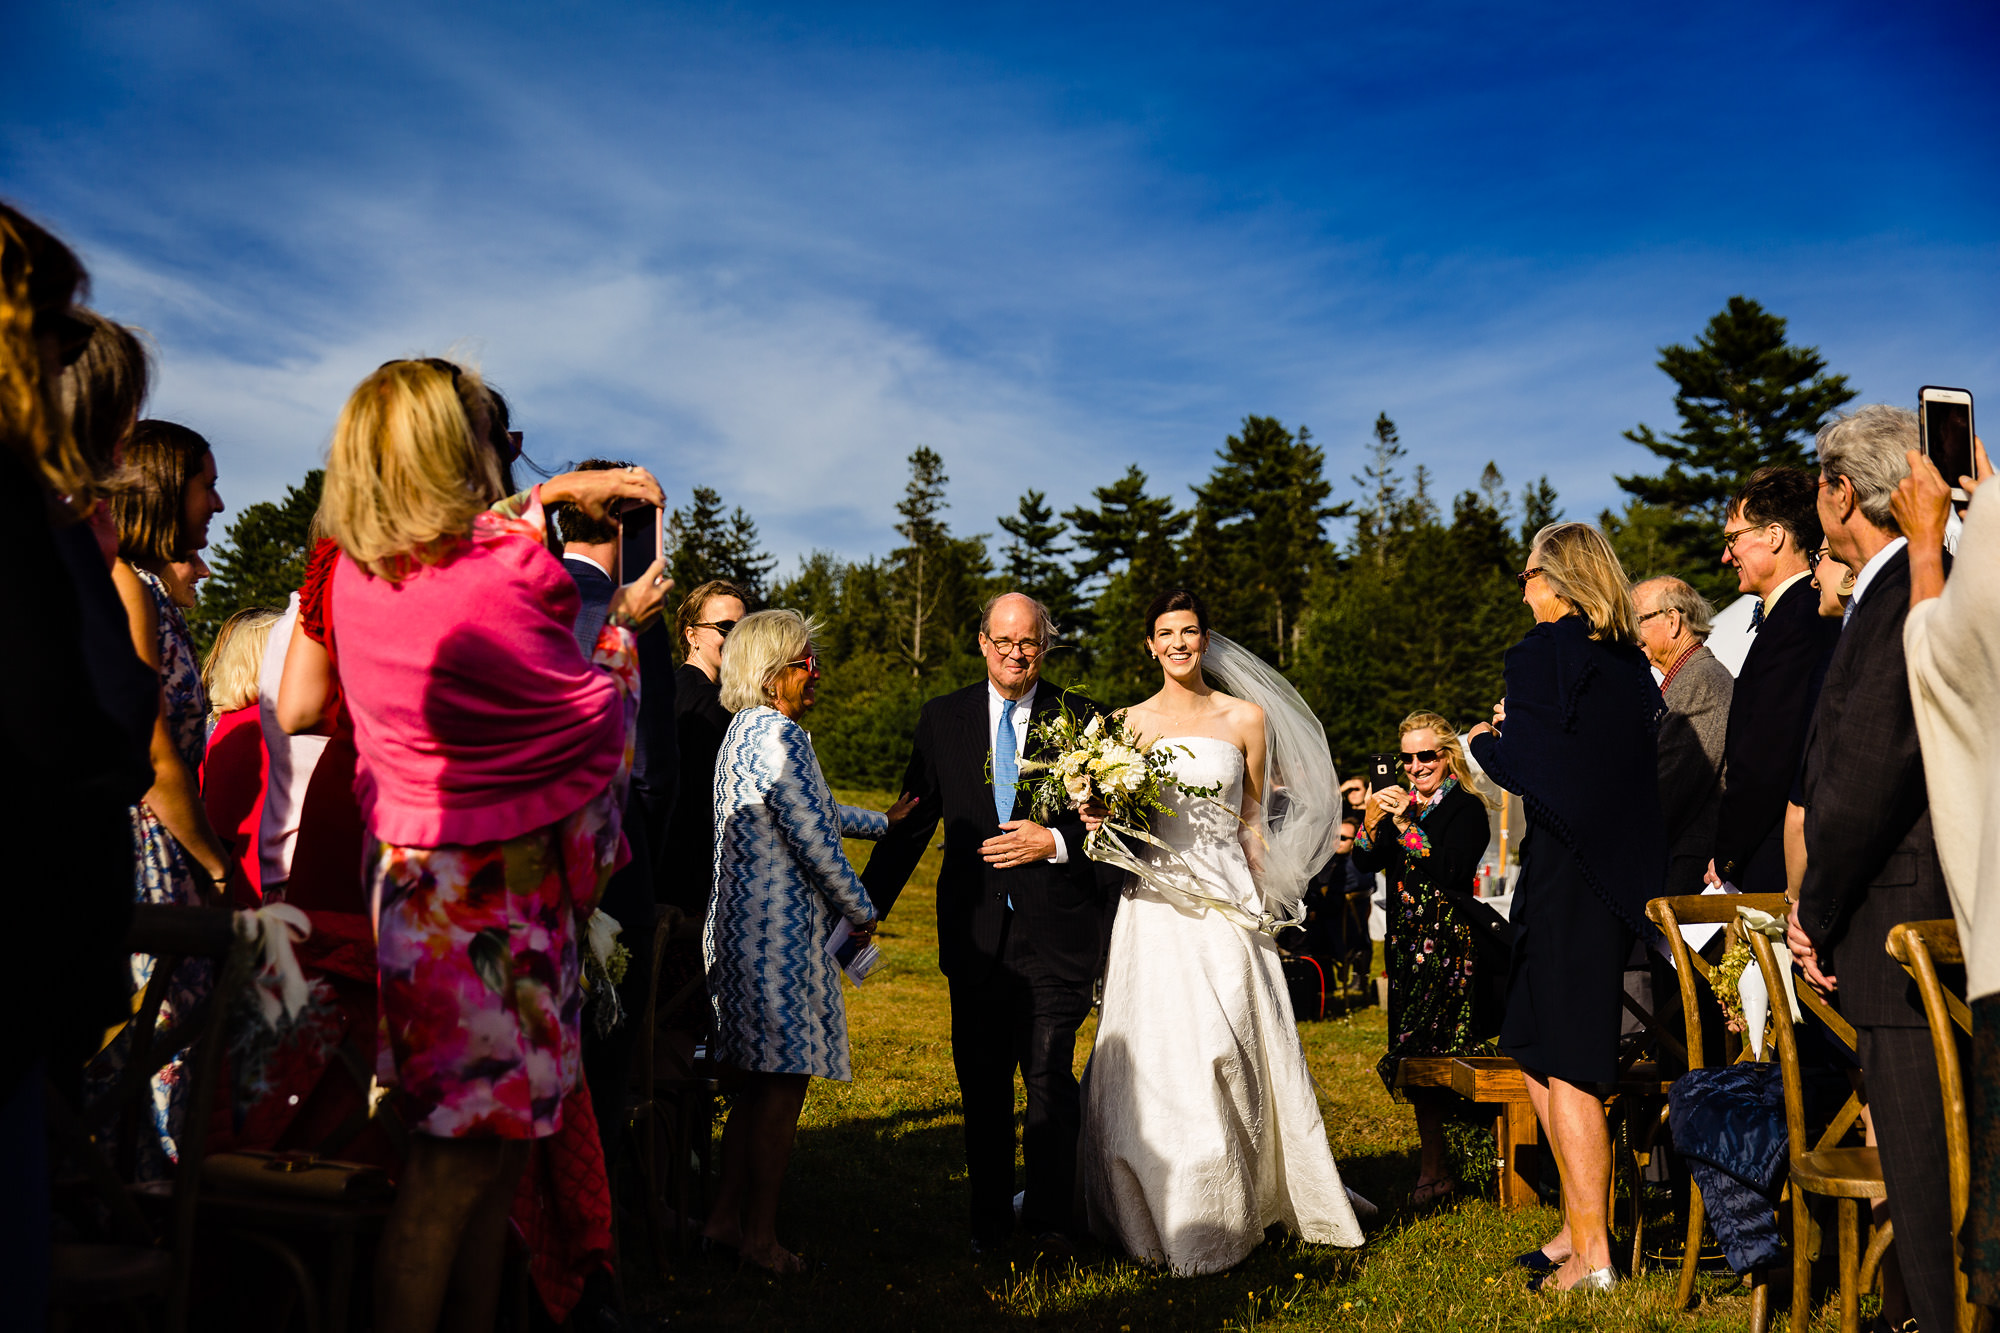 The bride walks down the aisle at her Maine wedding